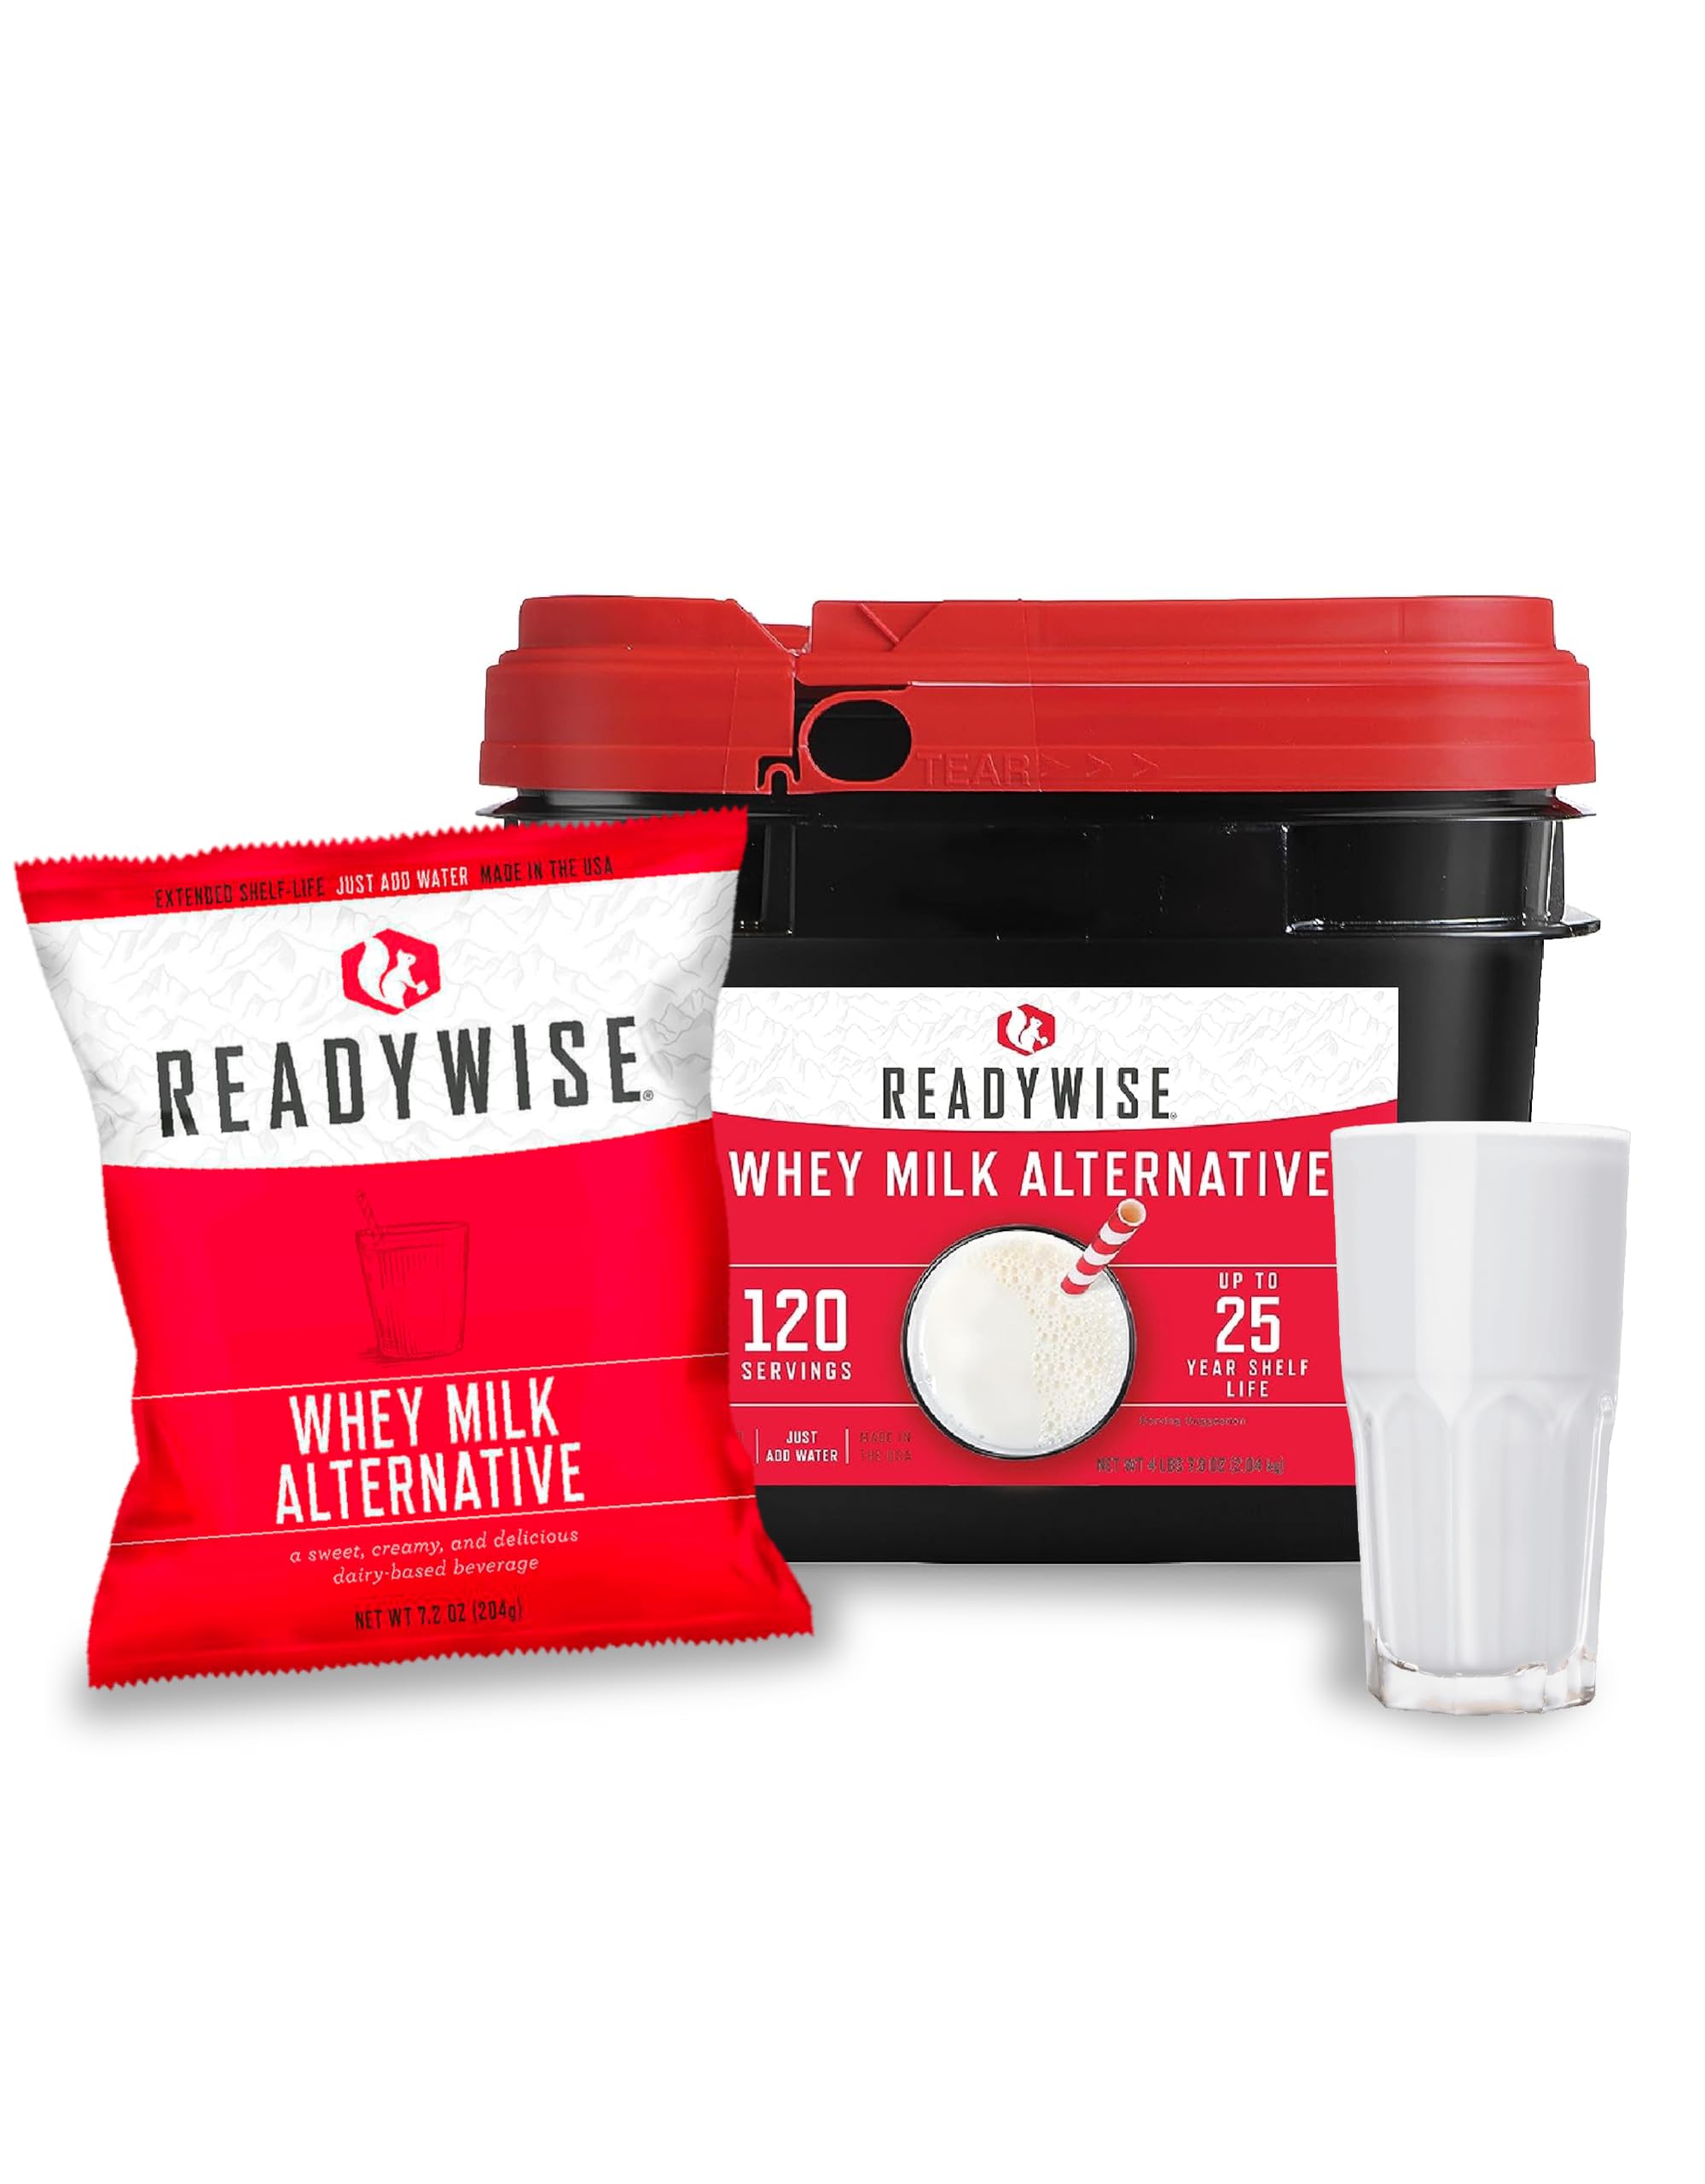 READYWISE - Whey Milk Alternative Bucket, 120 Servings, Emergency, MRE Meal & Drink Supply, Premade, Freeze Dried Survival Drink for Hiking, Adventure and Camping Essentials, Individually Packaged, 25 Year Shelf Life